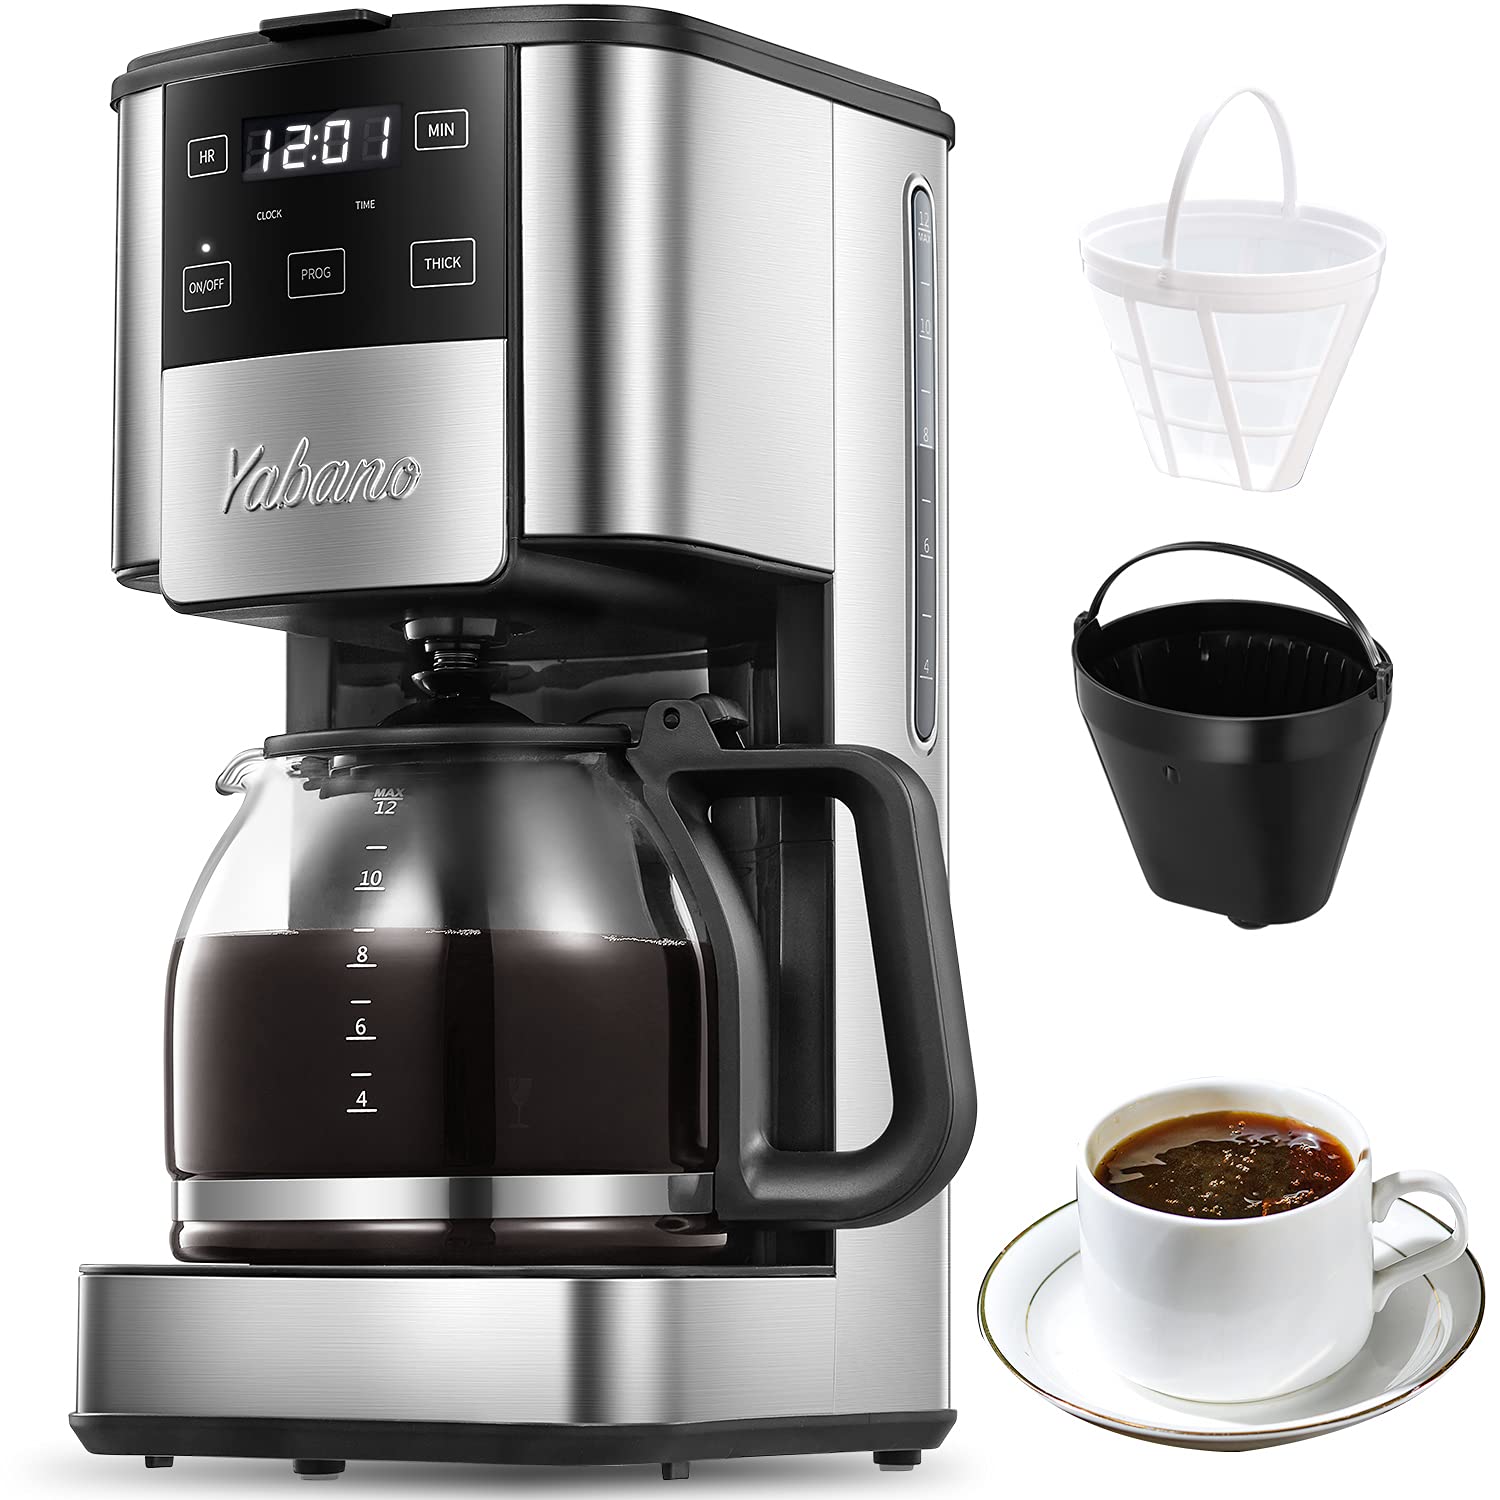 12 Cups Programmable Coffee Maker with Timer and Glass Carafe